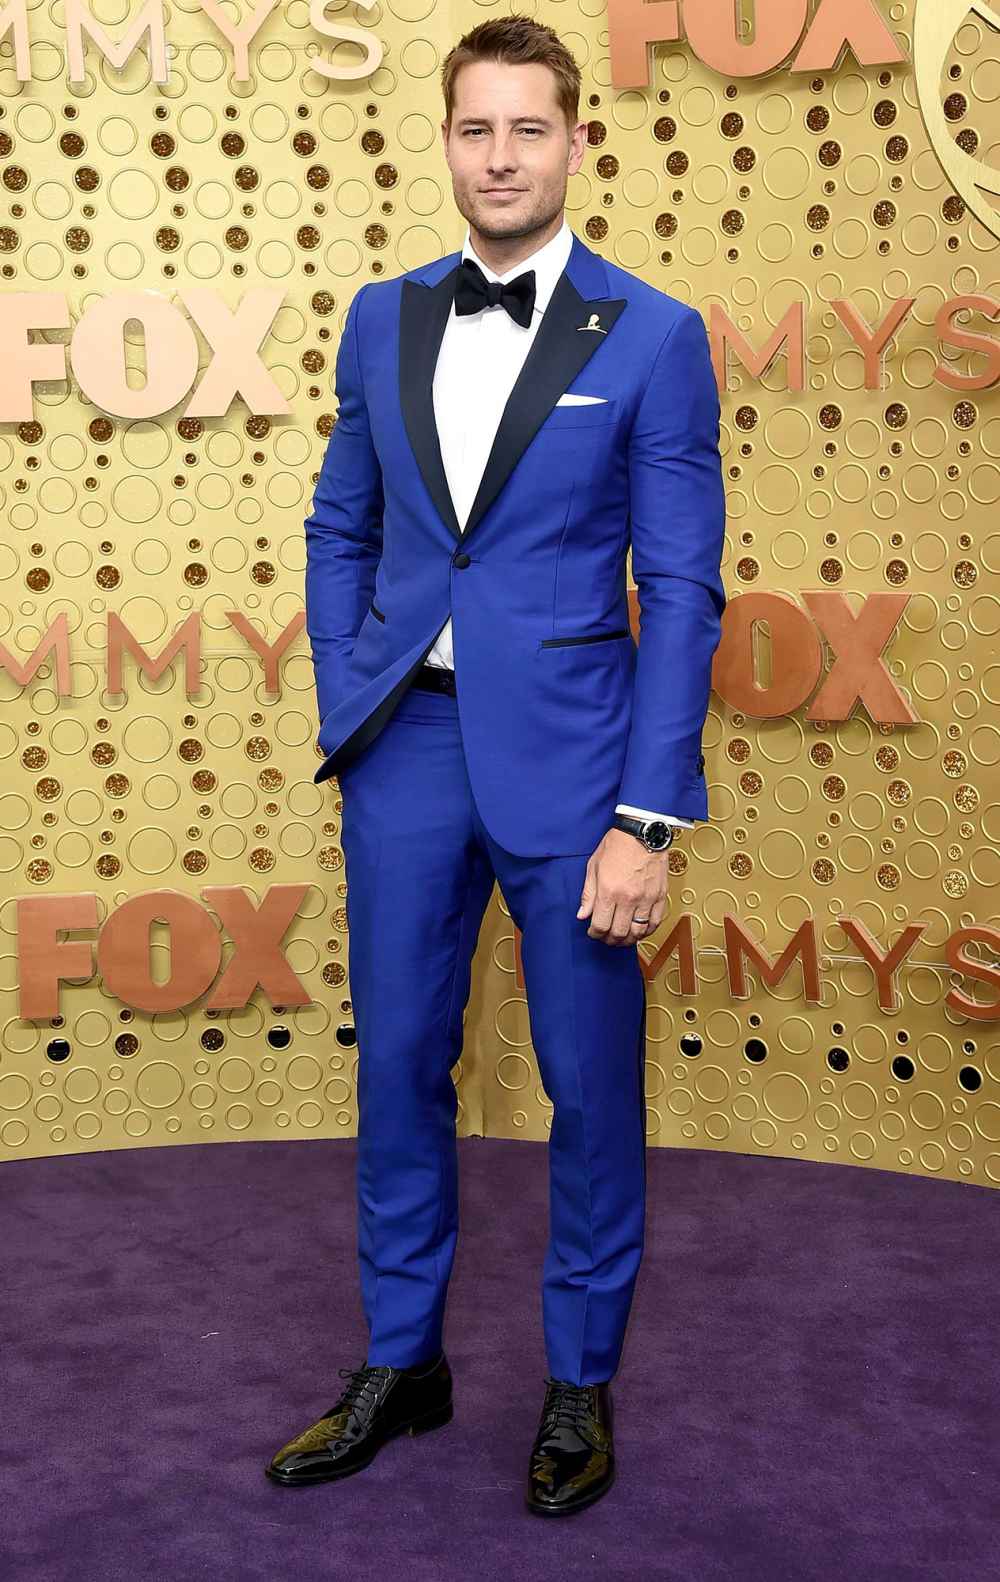 Justin Hartley Parenting Fails Emmys 2019